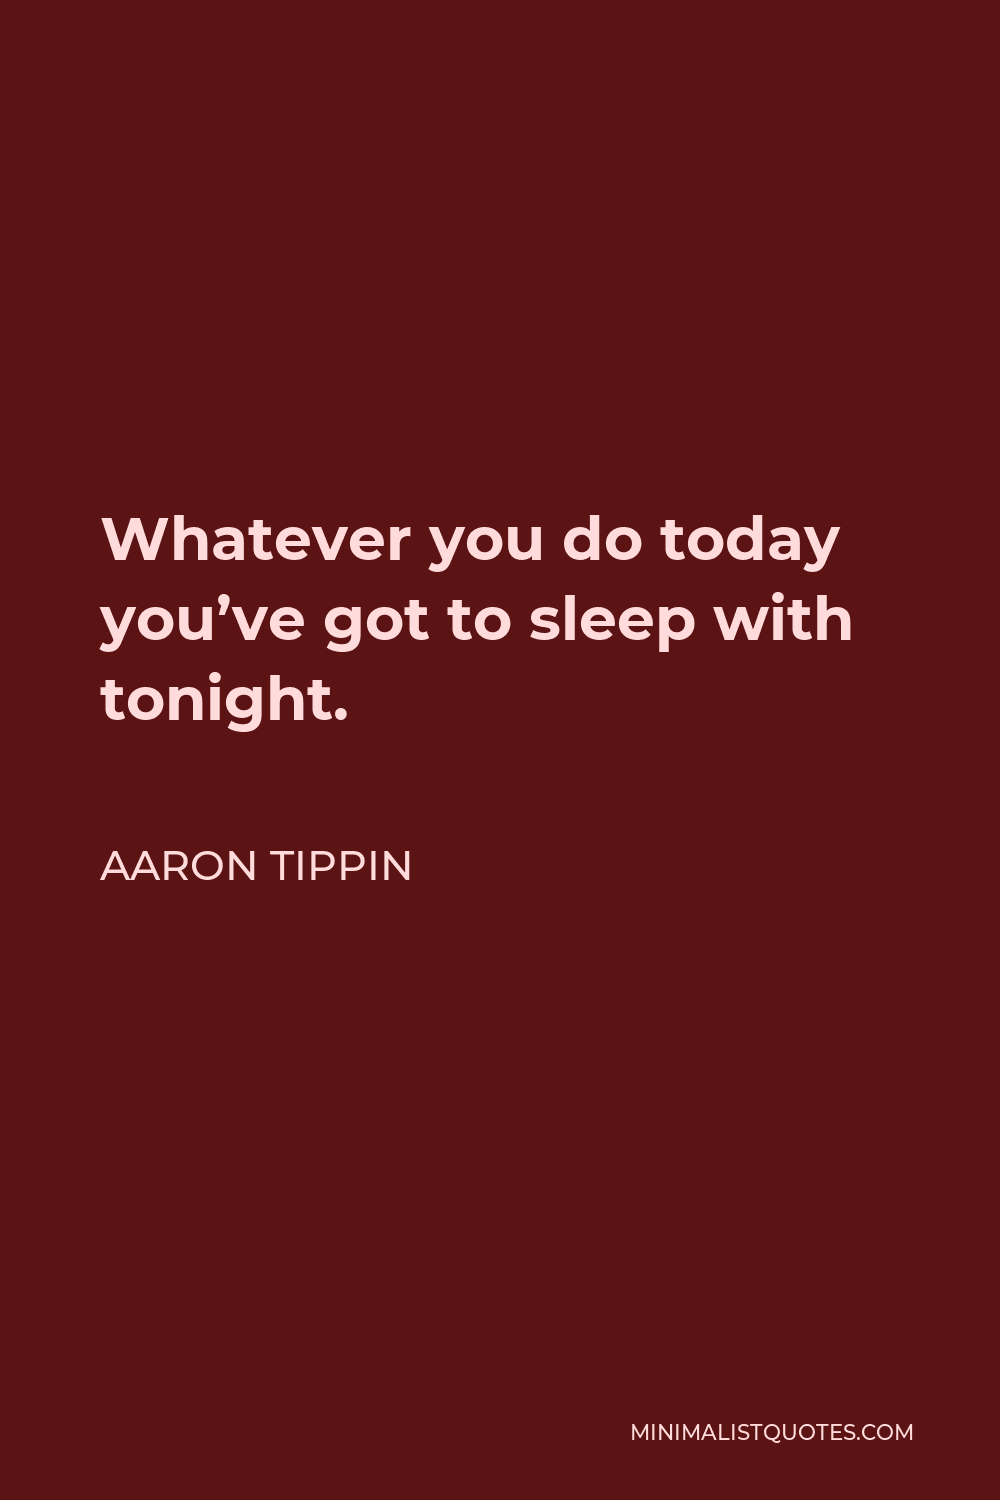 Aaron Tippin Quote - Whatever you do today you’ve got to sleep with tonight.